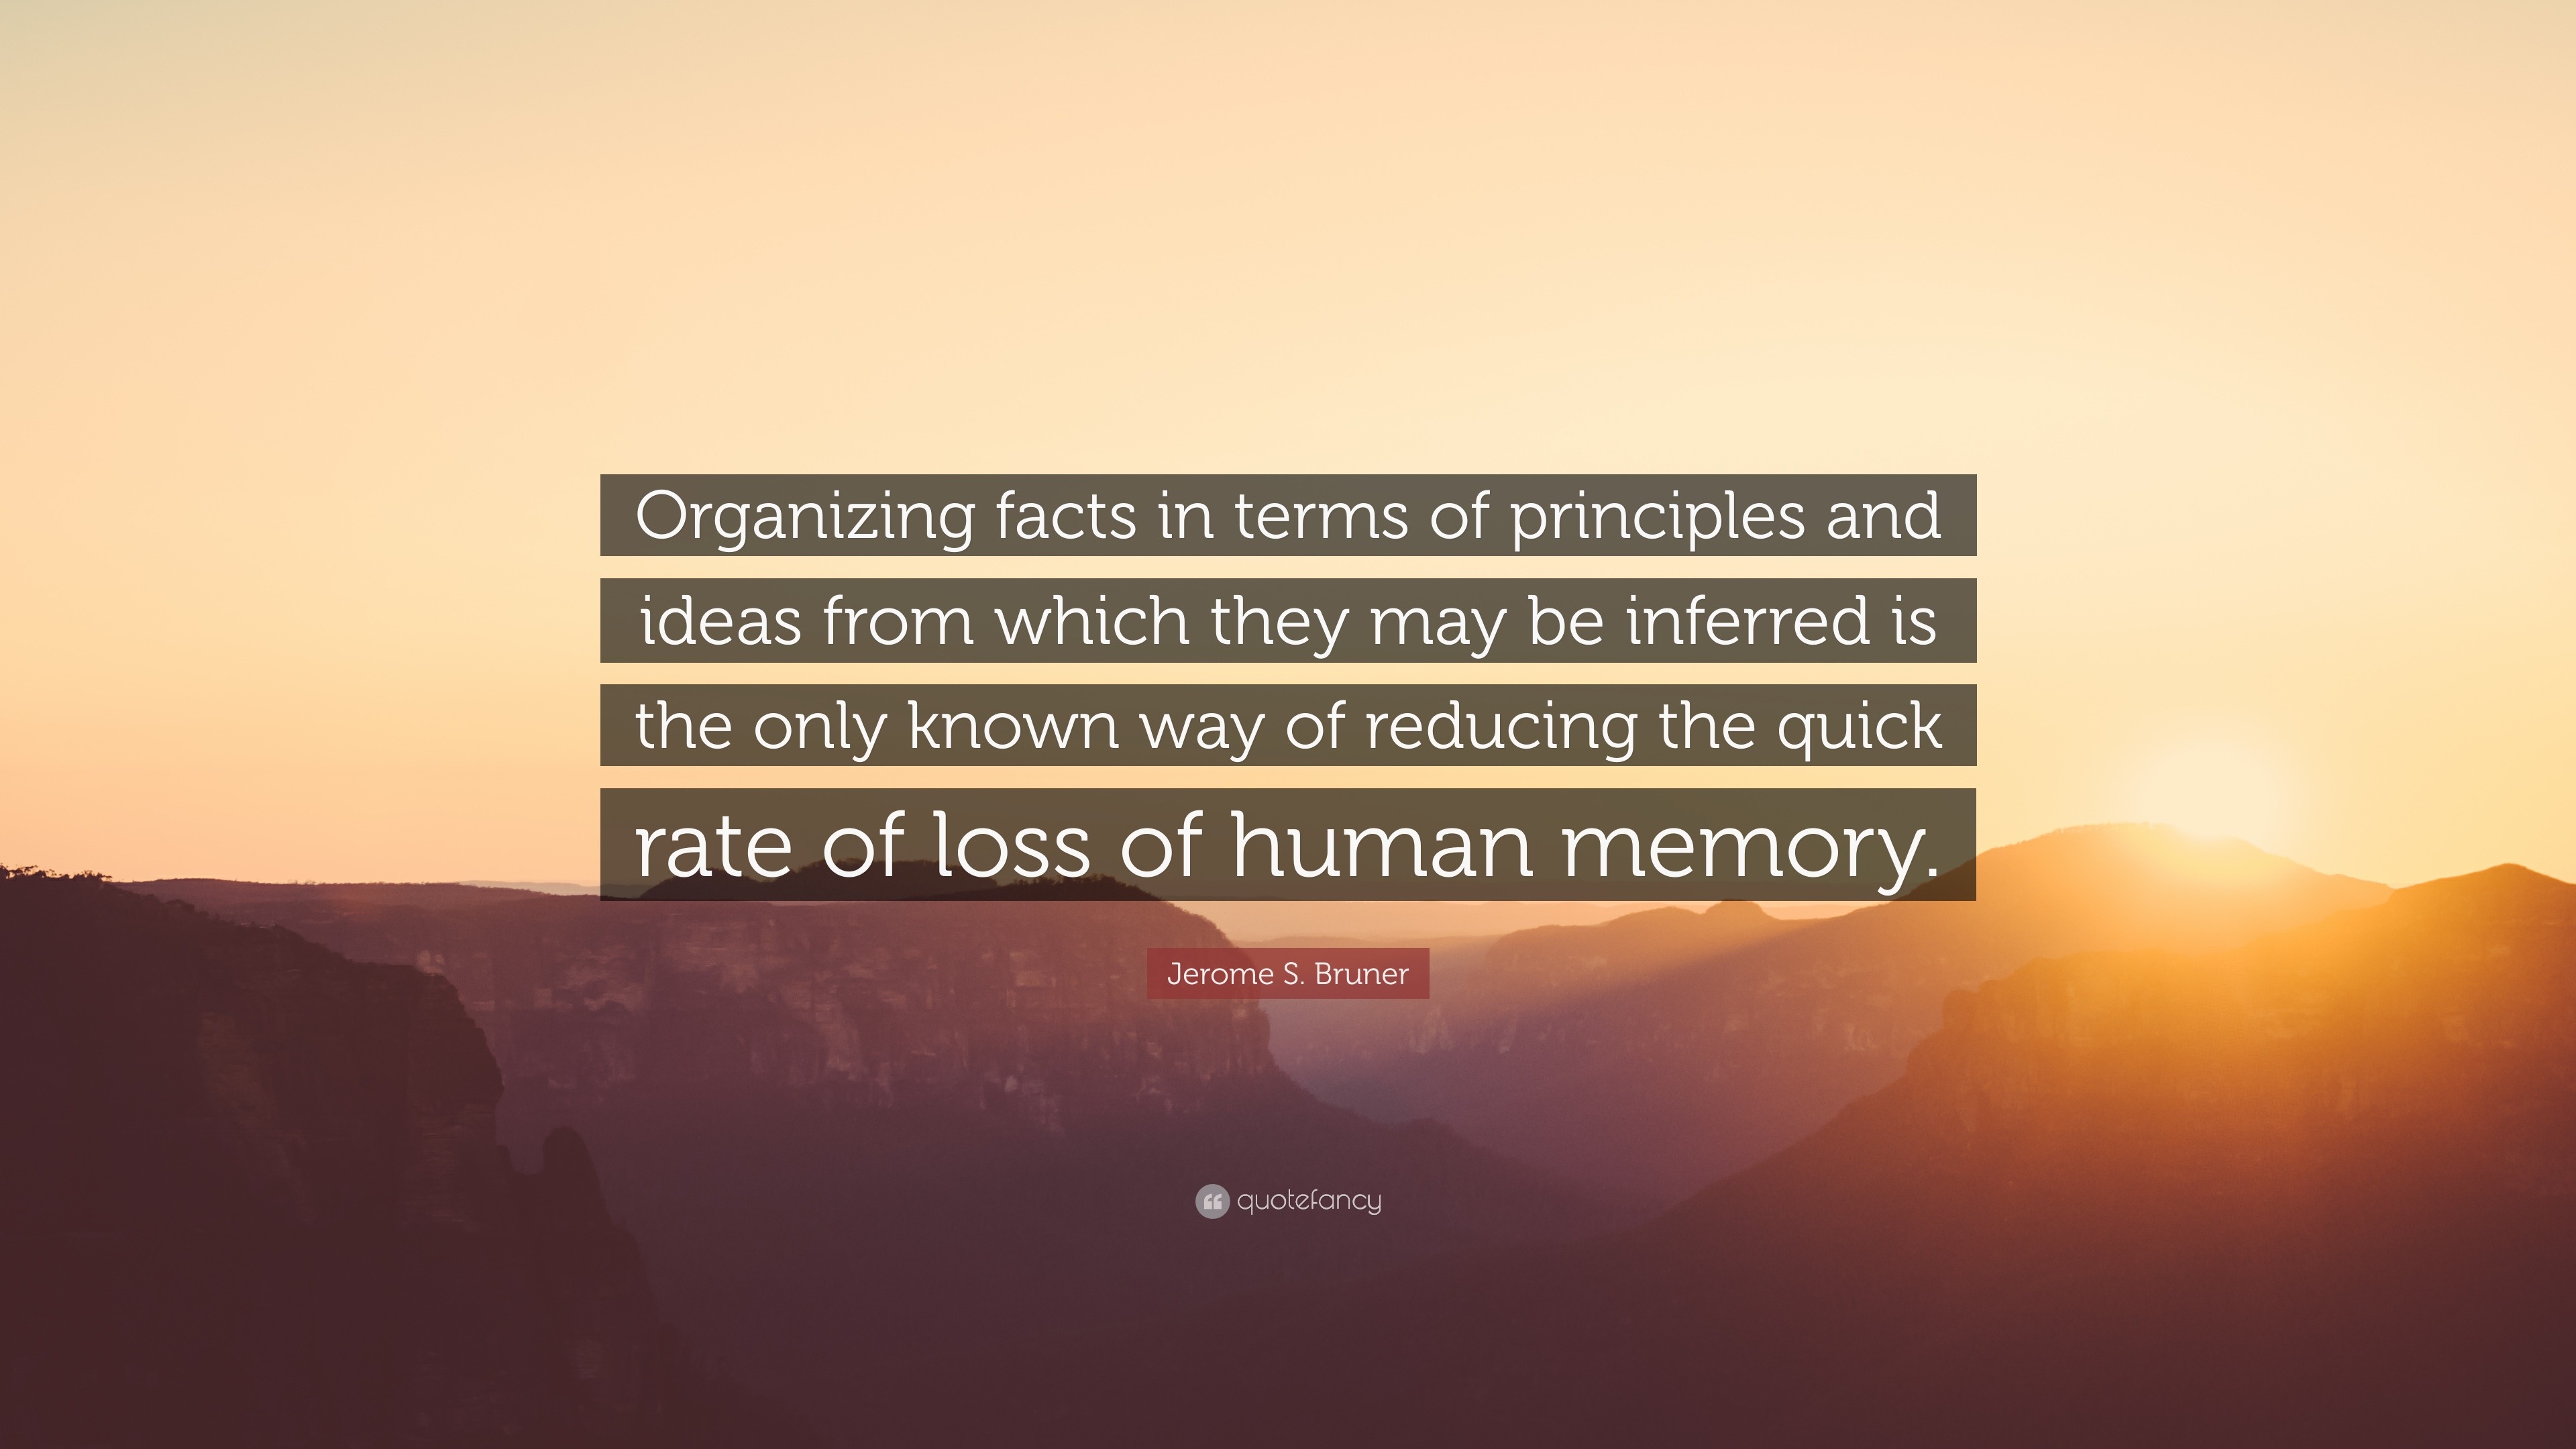 Jerome S. Bruner Quote: “Organizing facts in terms of principles and